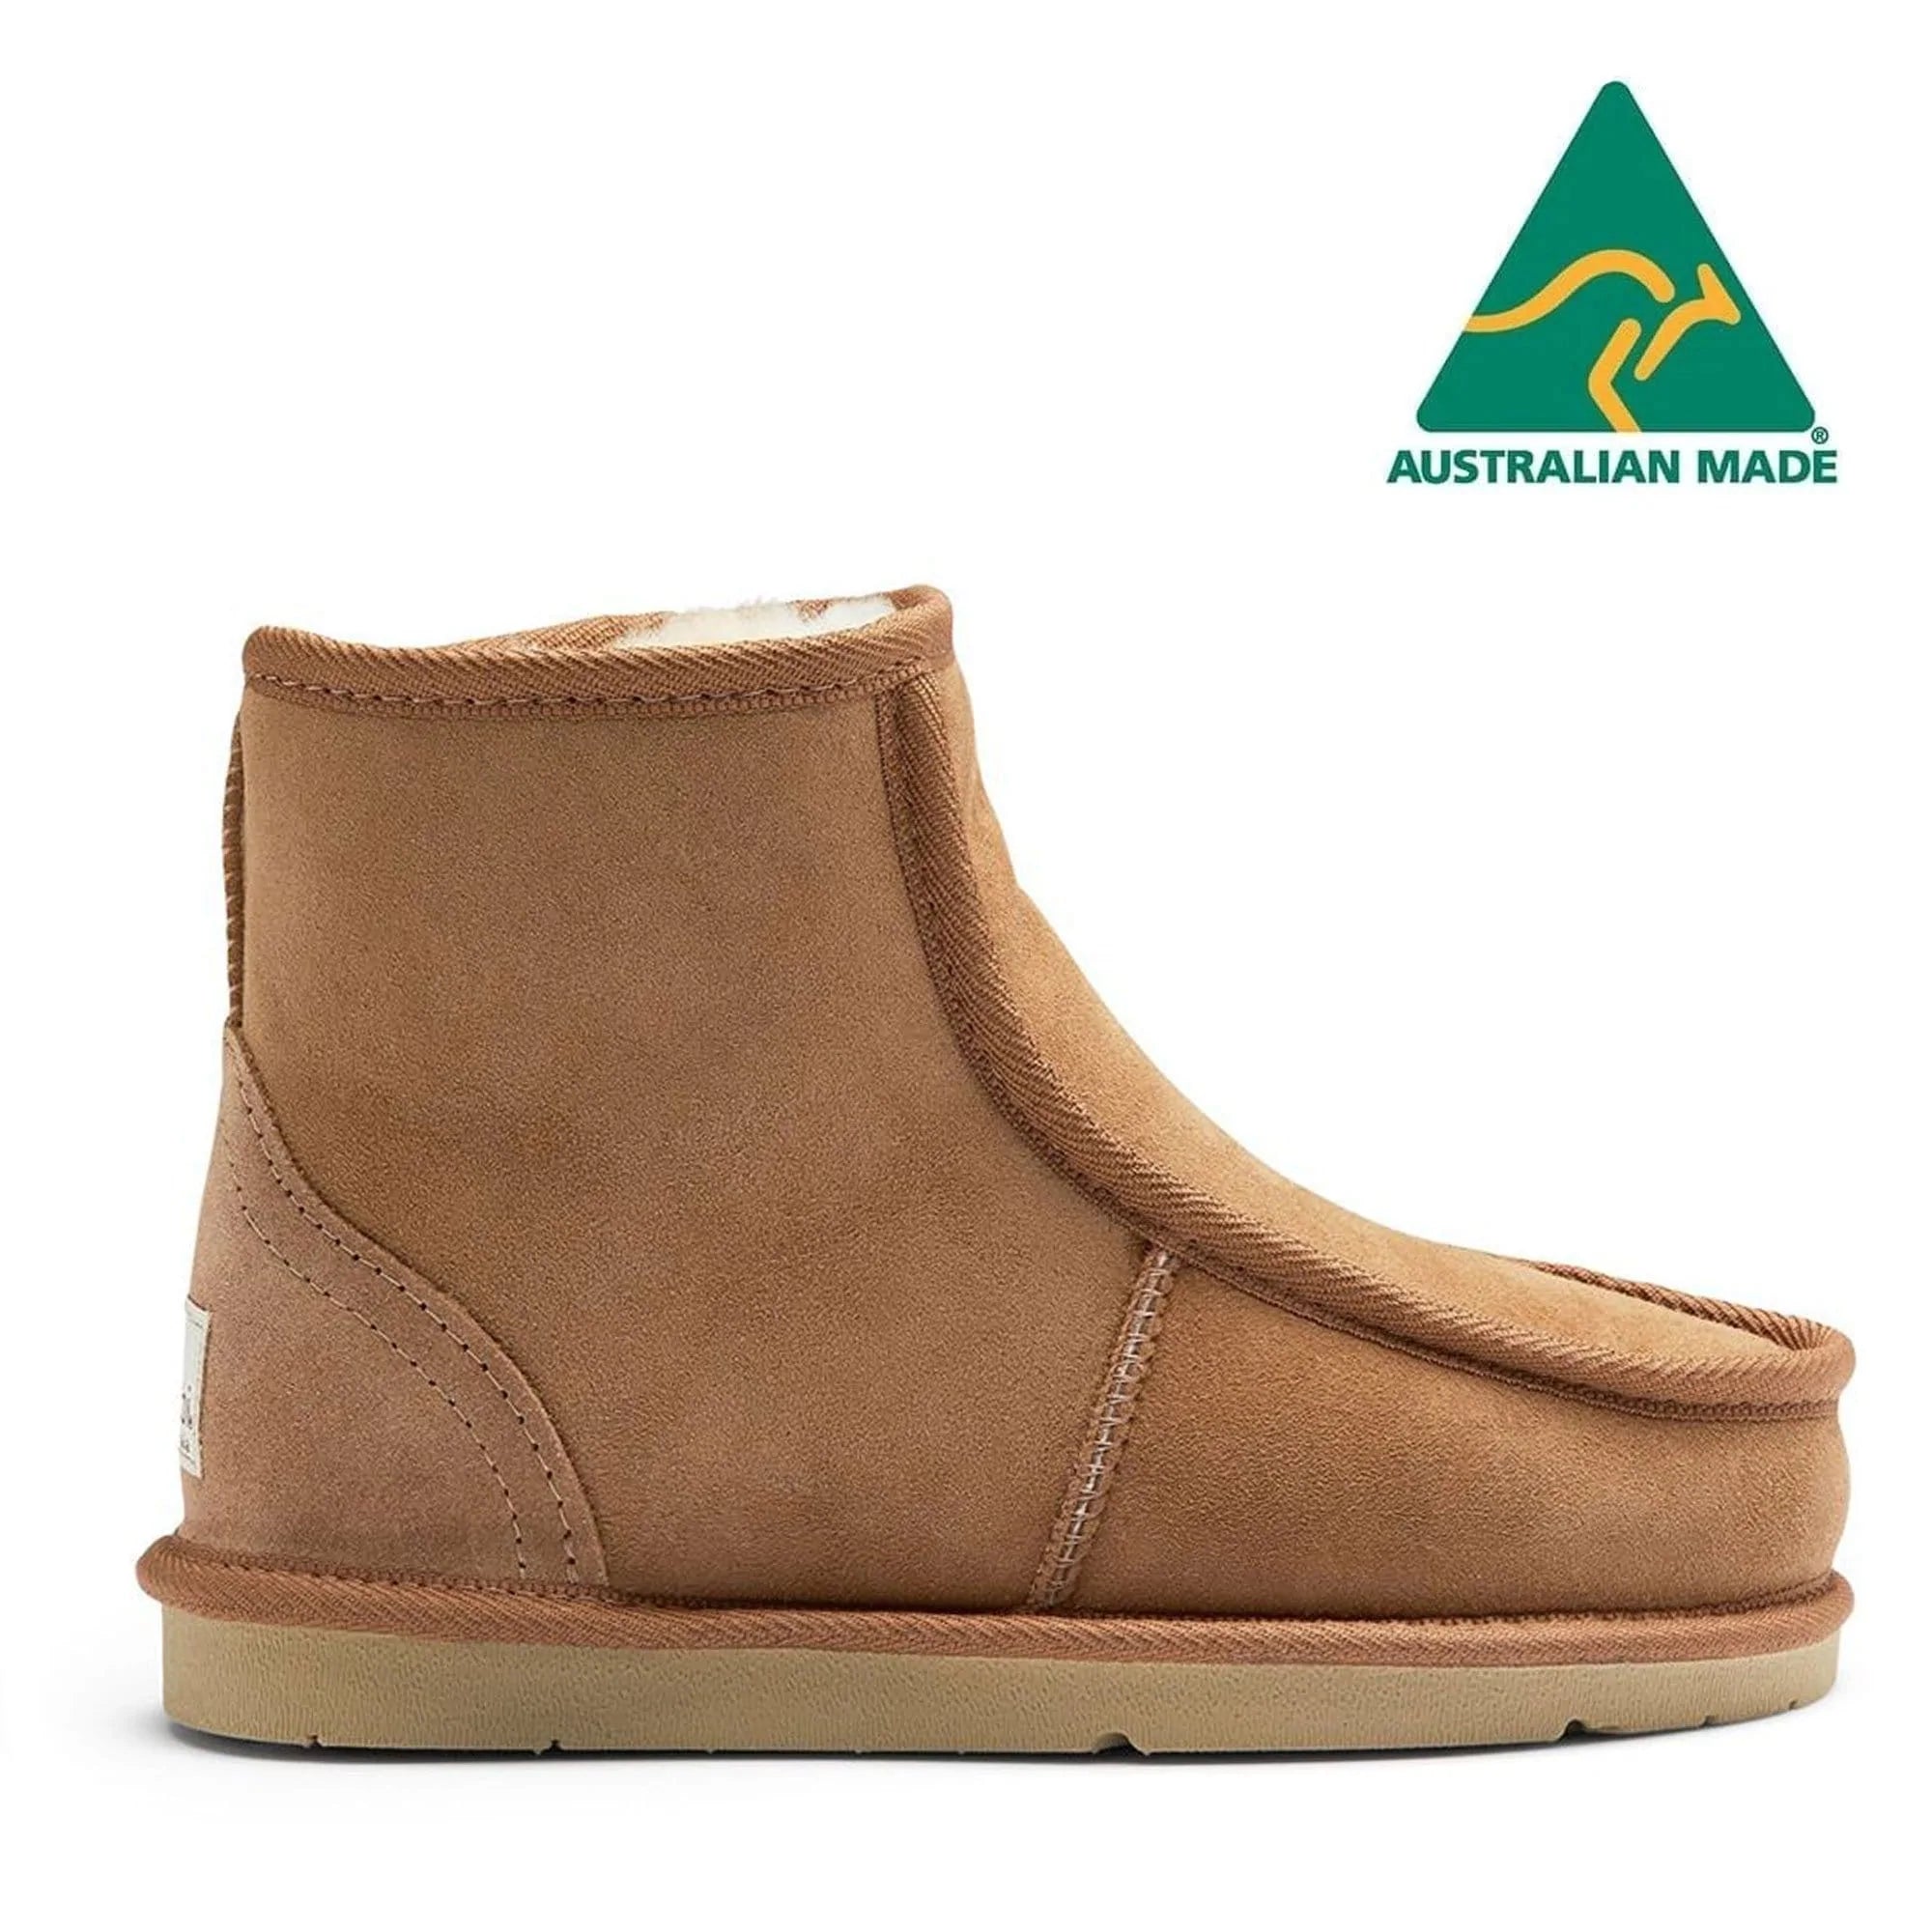 Ugg Boots - UGG Deluxe Boots -Made in Australia - Original UGG Australia Classic